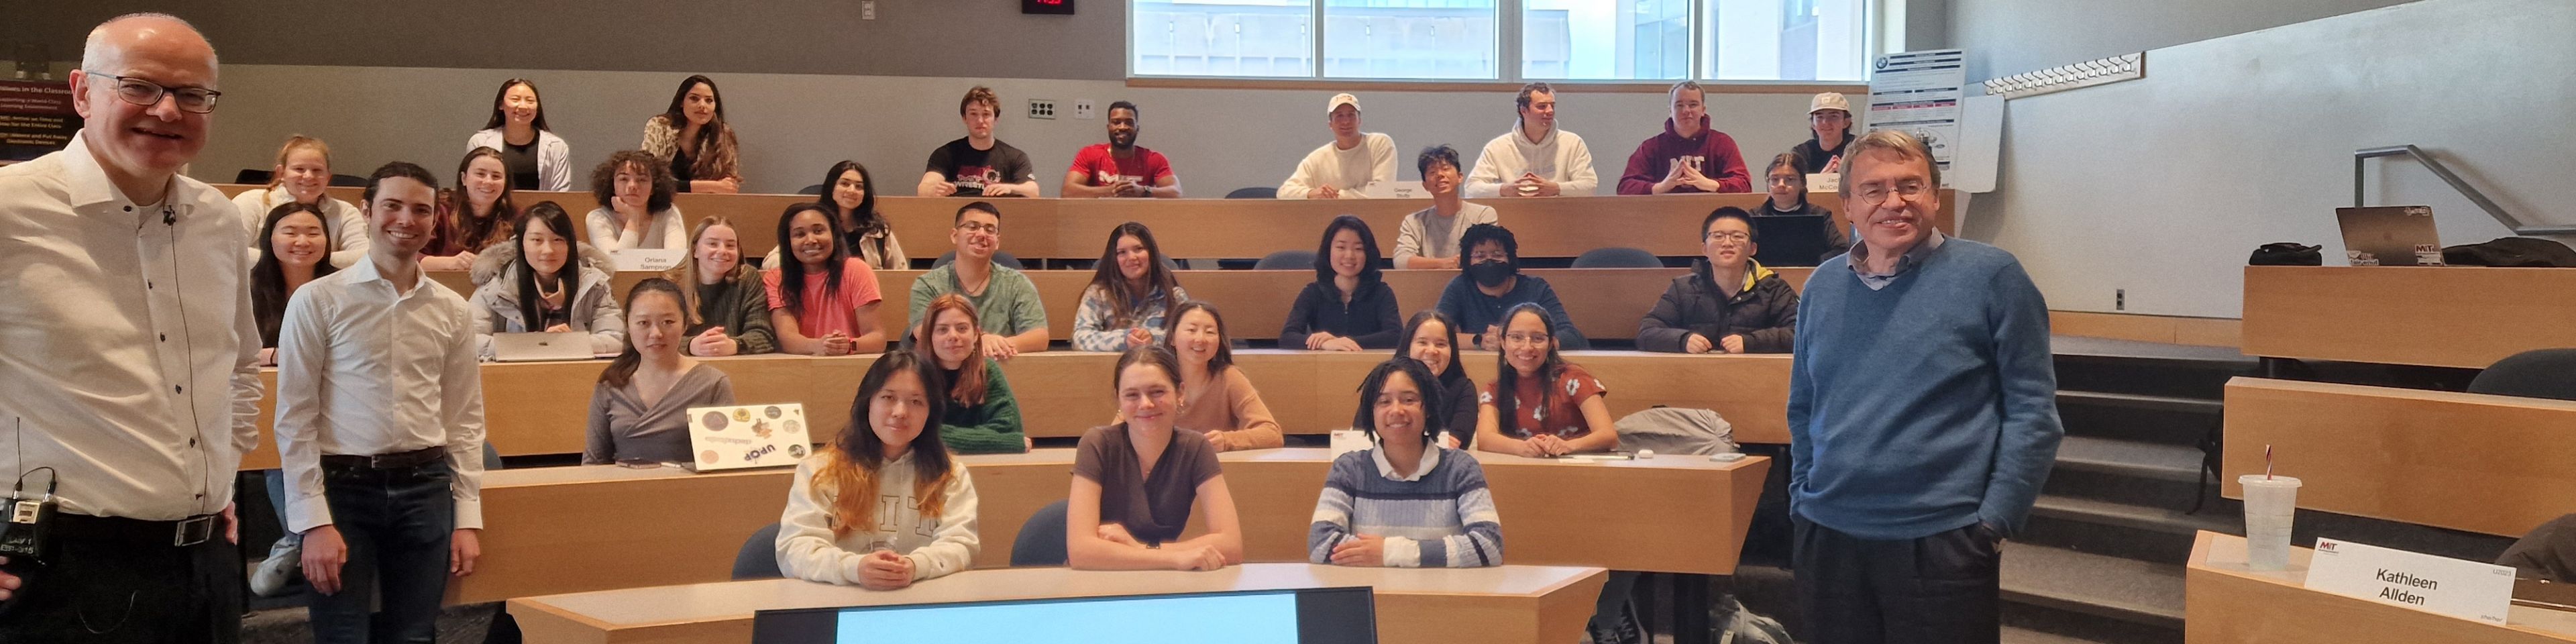 The undergraduate course “Analytics for a Better World” kicks off at MIT